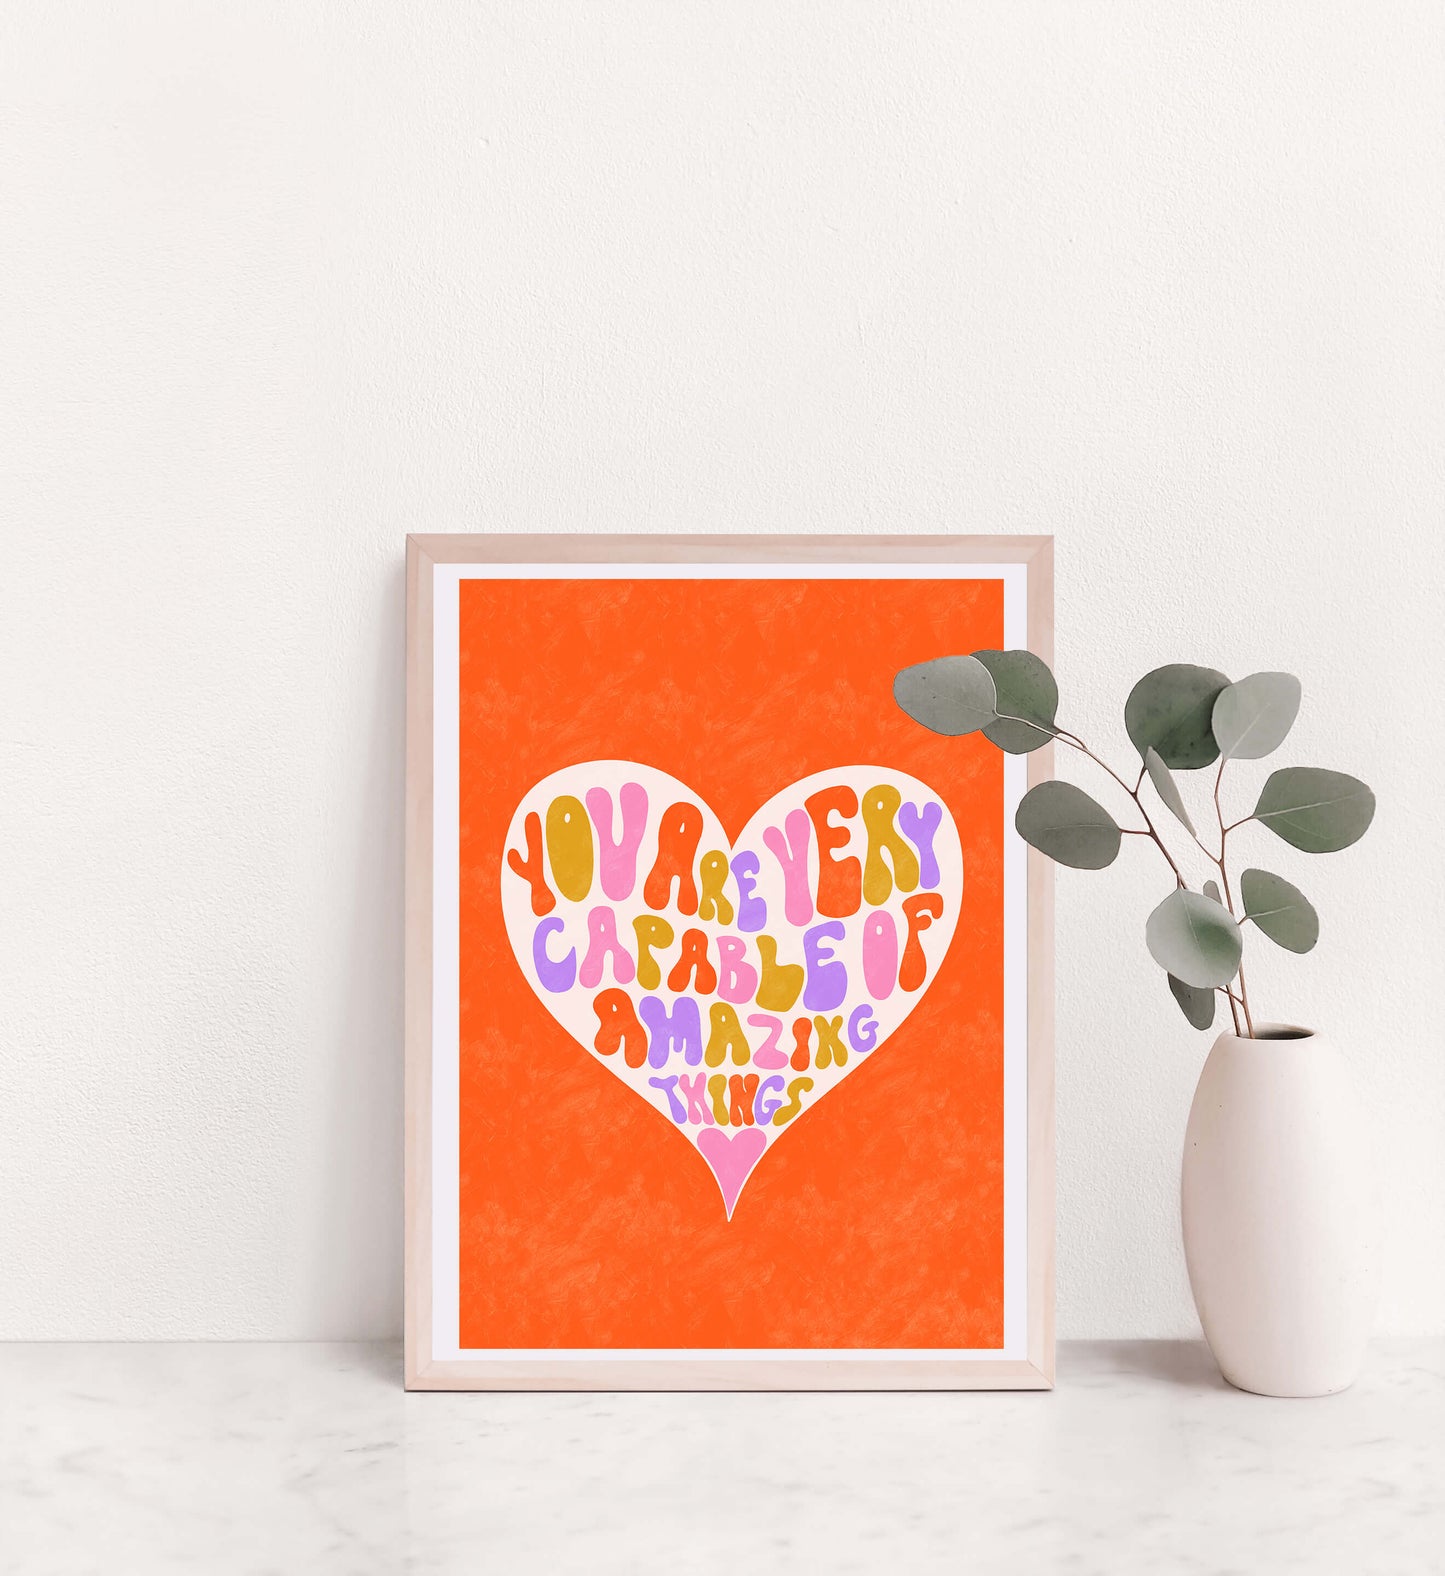 You Are Very Capable of Amazing Things - Positive Art Print